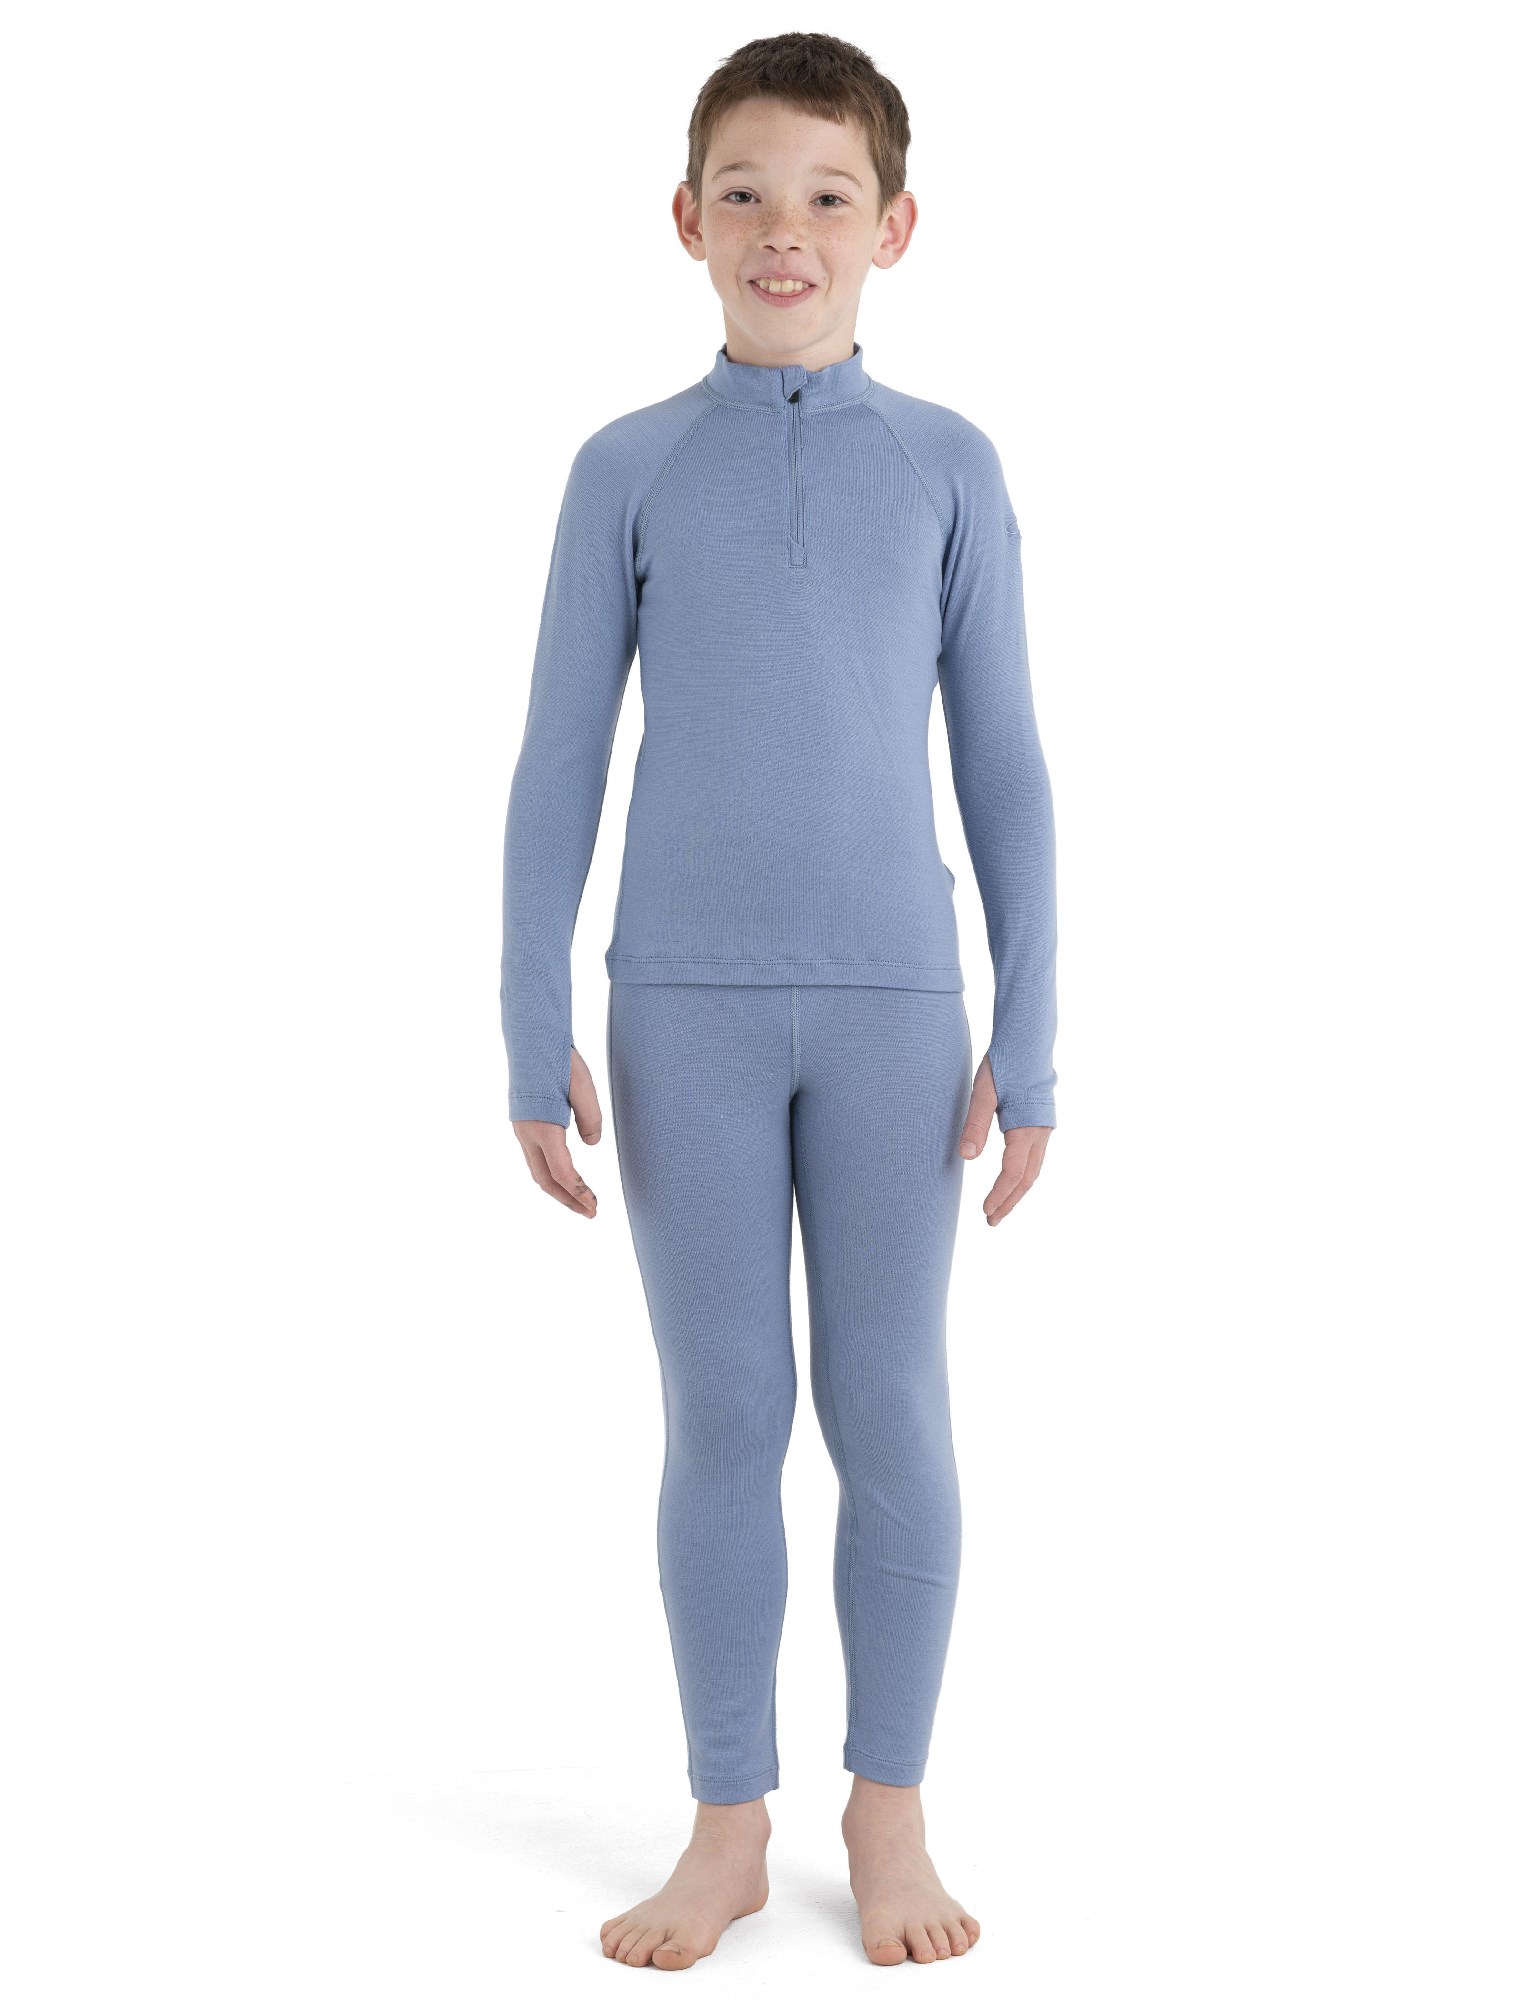 Icebreaker 260 Tech Thermal Leggings - Kids , Up to 17% Off with Free S&H —  CampSaver